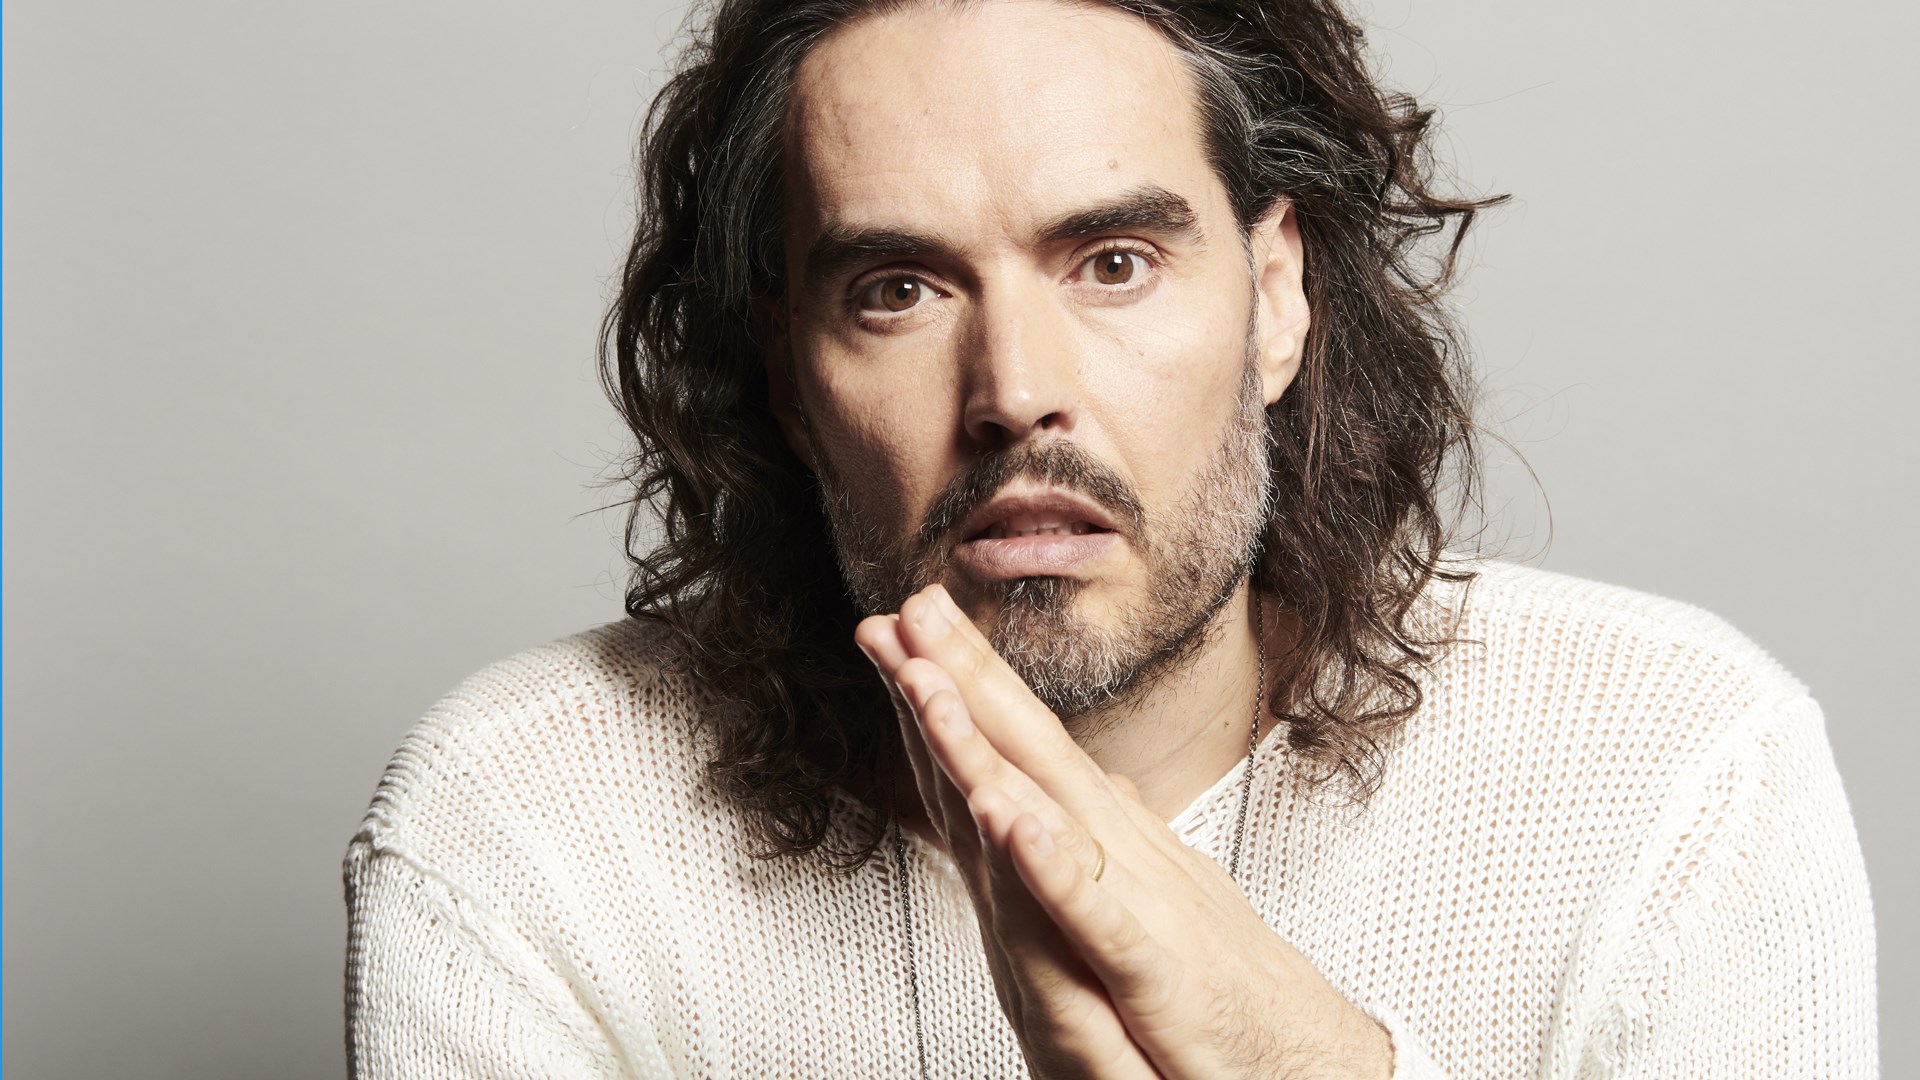 42 Facts about Russell Brand - Facts.net